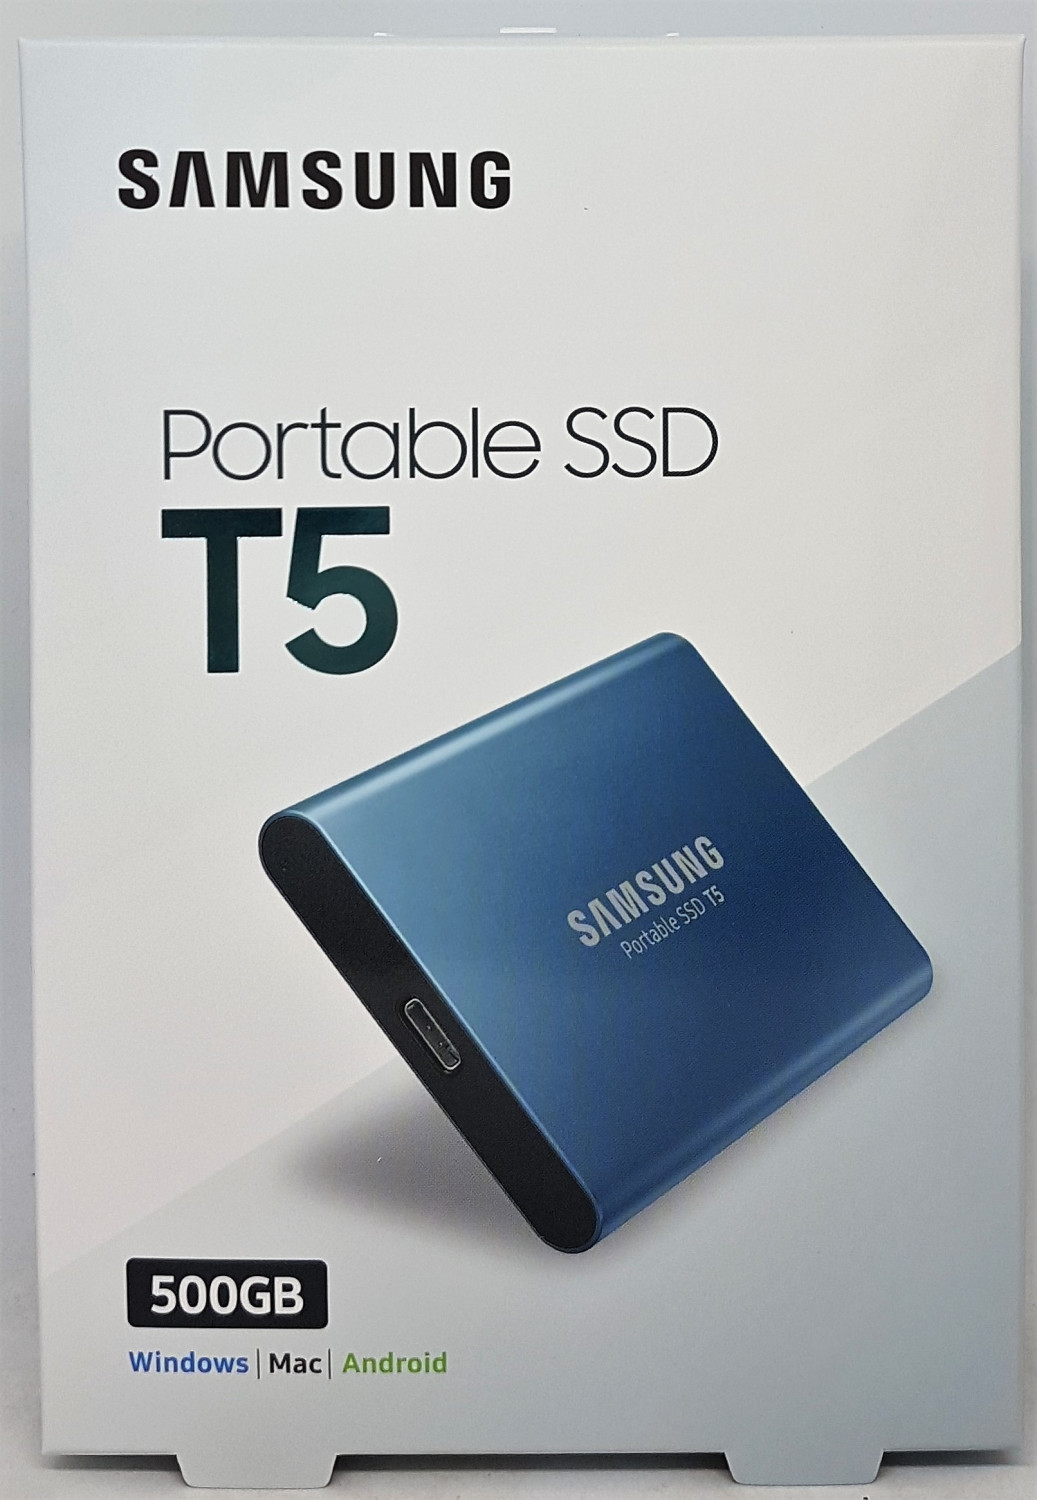 Samsung Ssd T5 pas cher - Achat neuf et occasion